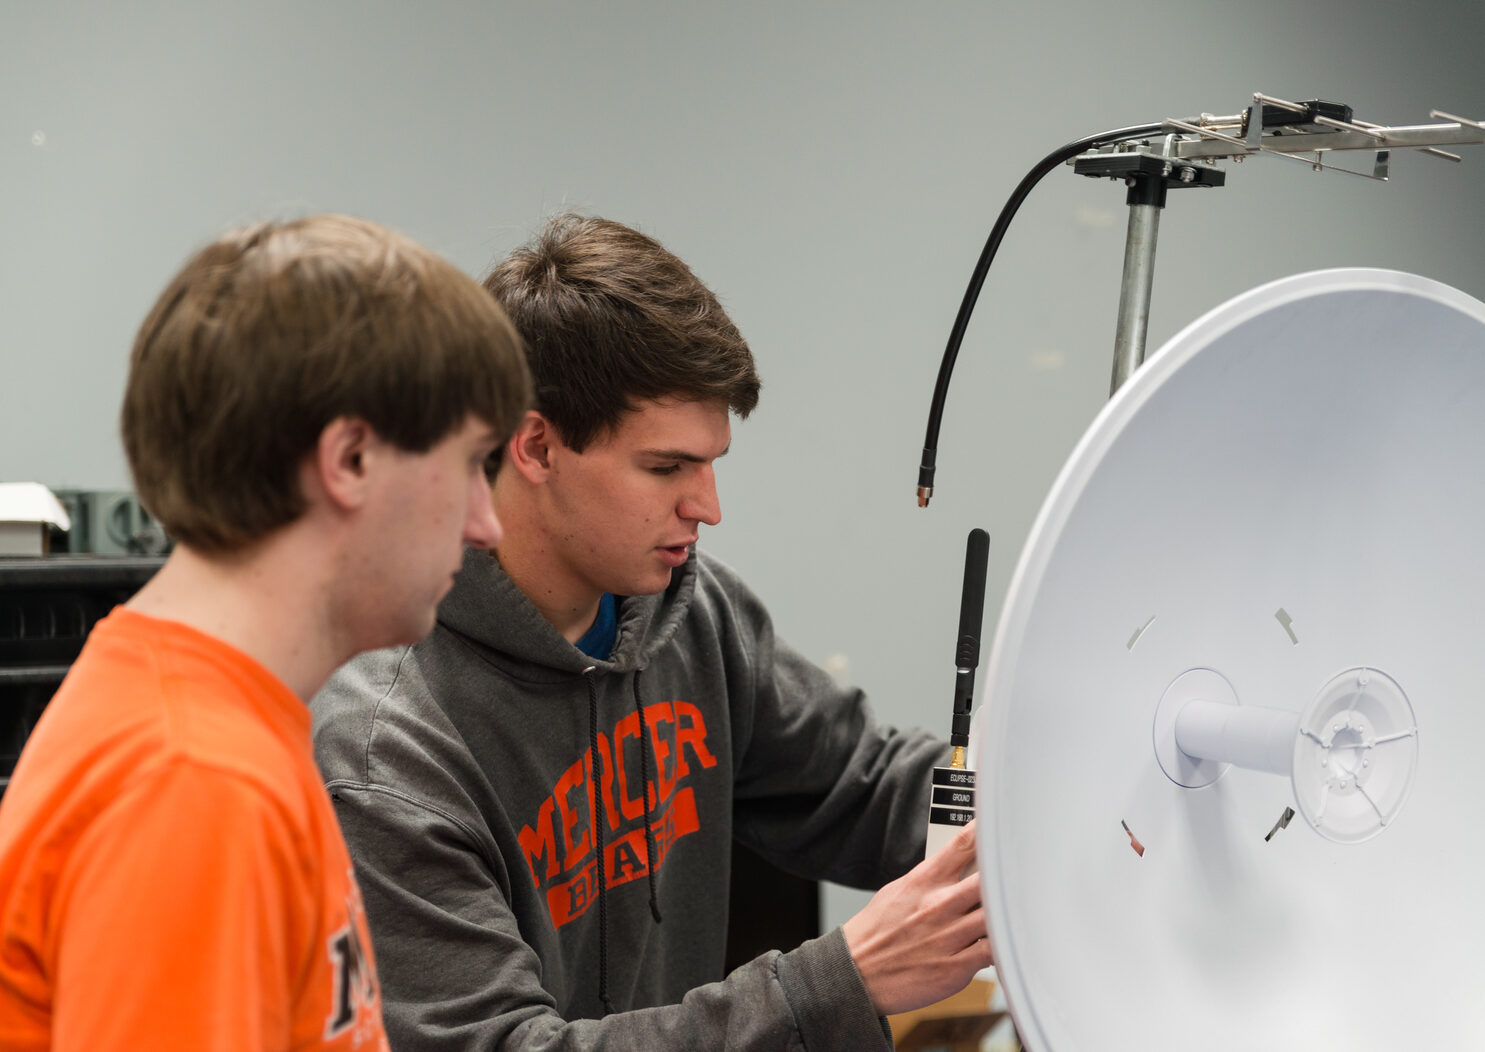 Two Mercer University students in an engineering lab working on a project